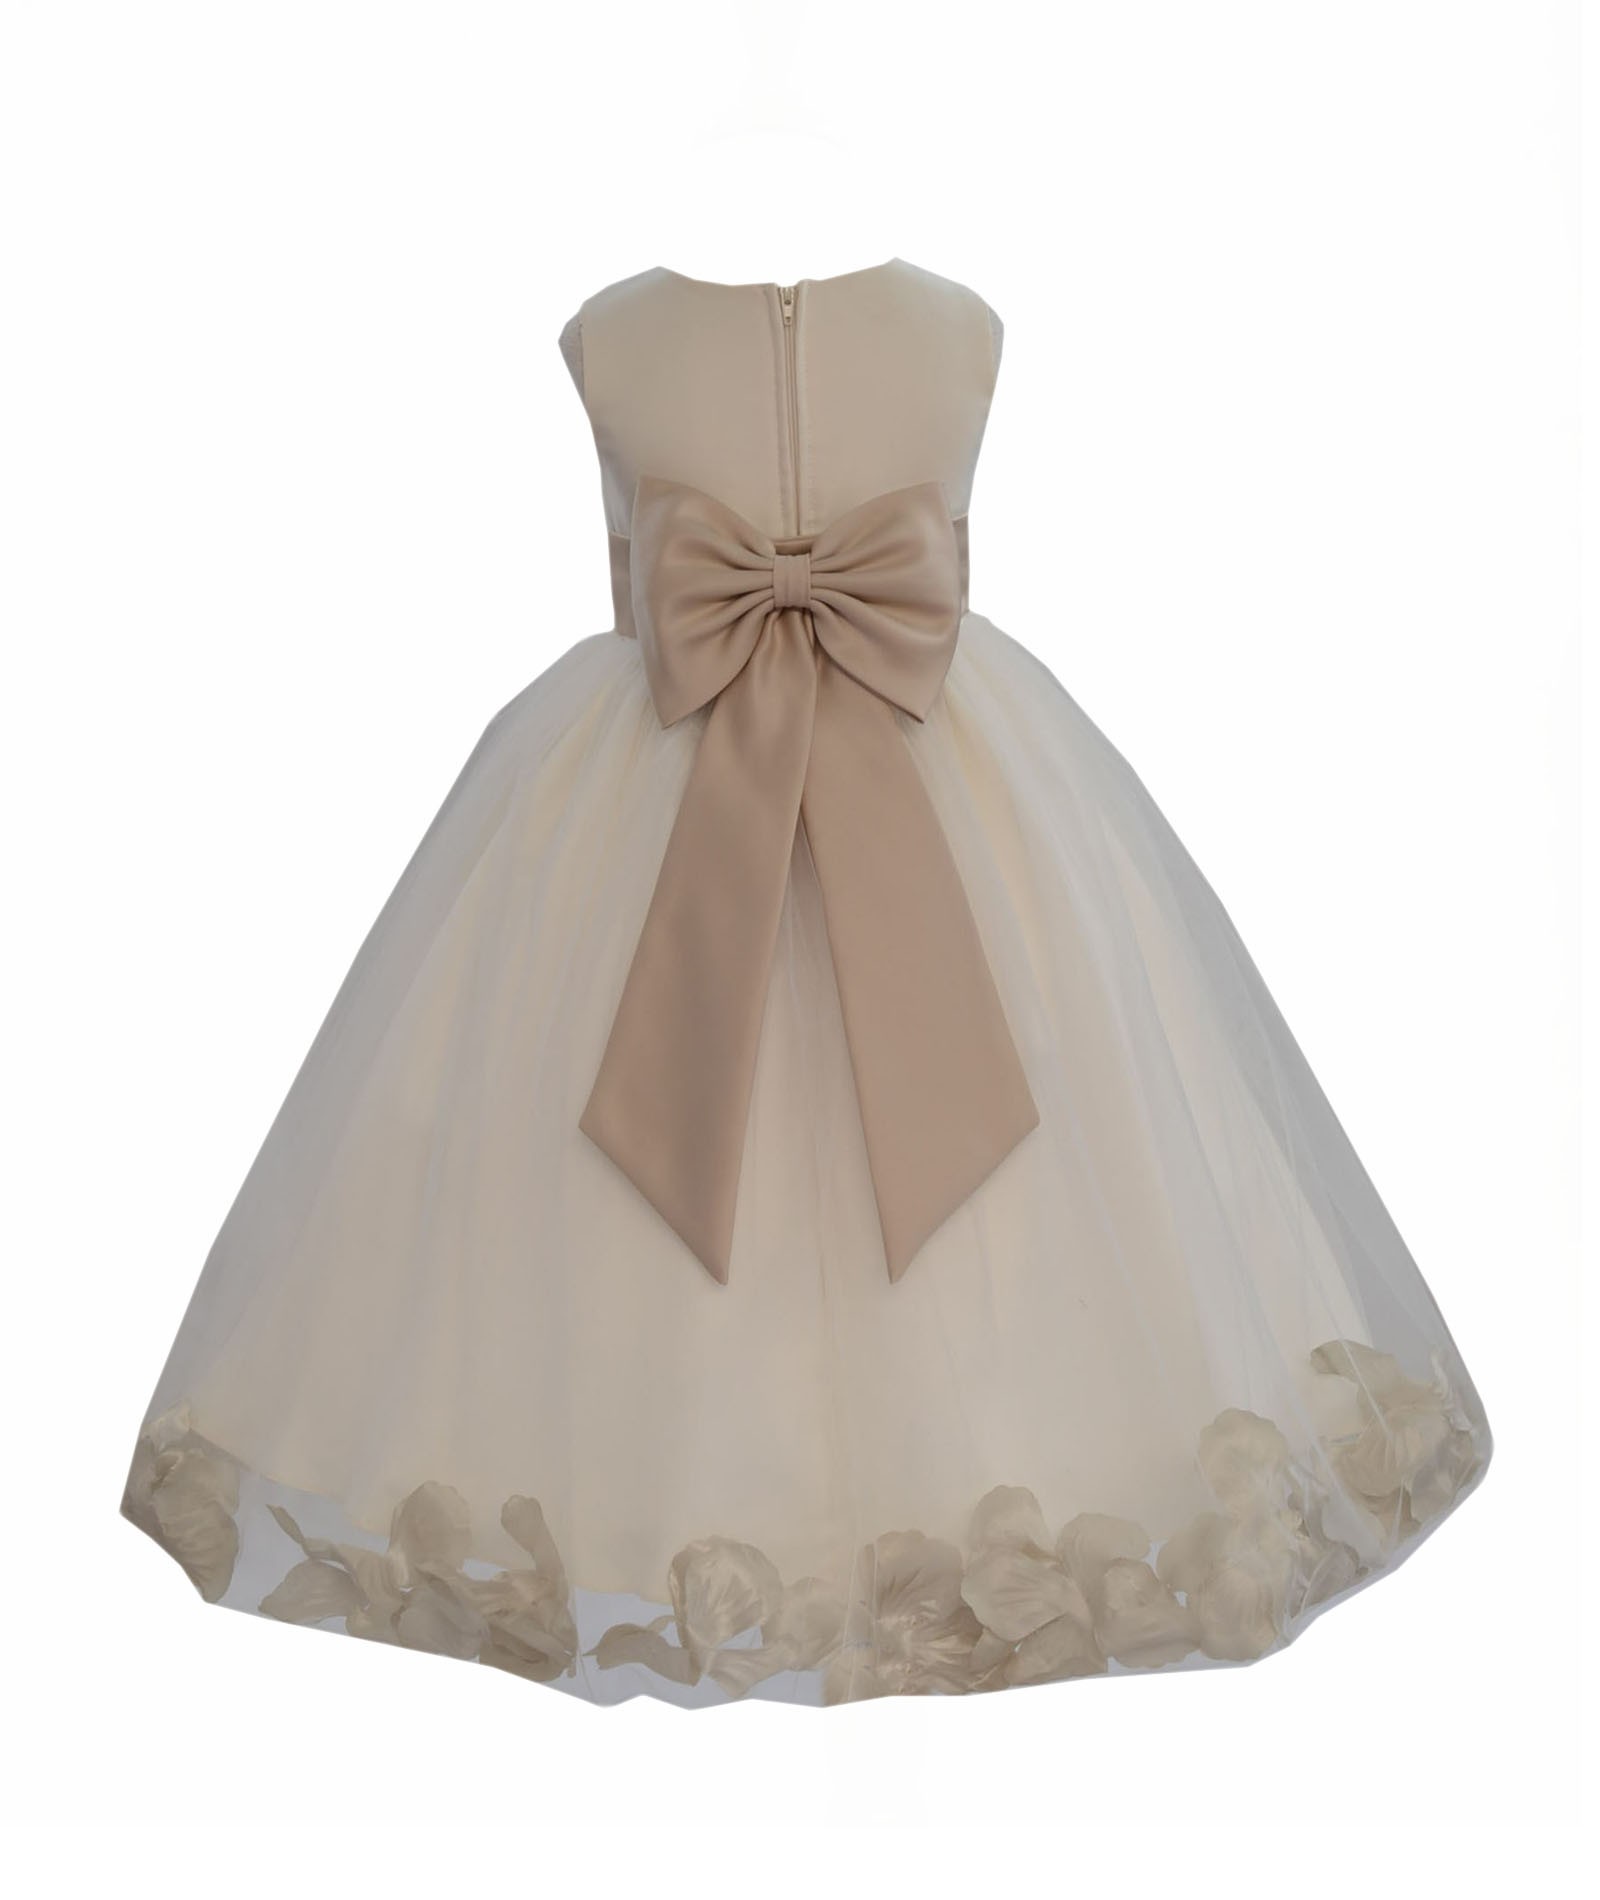 Ivory/Champagne Tulle Rose Petals Flower Girl Dress Recital 302a